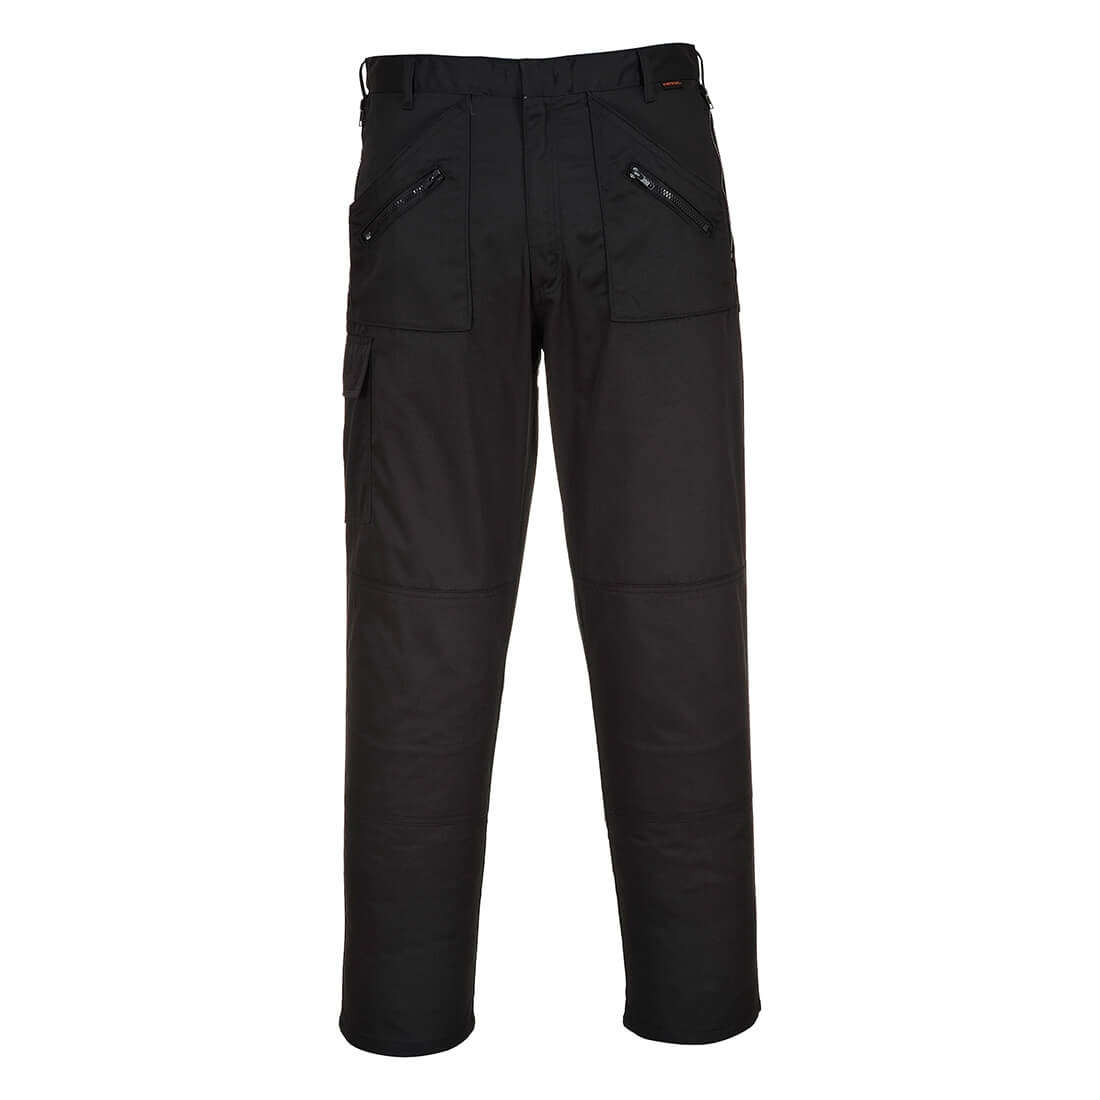 Action Trousers - Safetywear